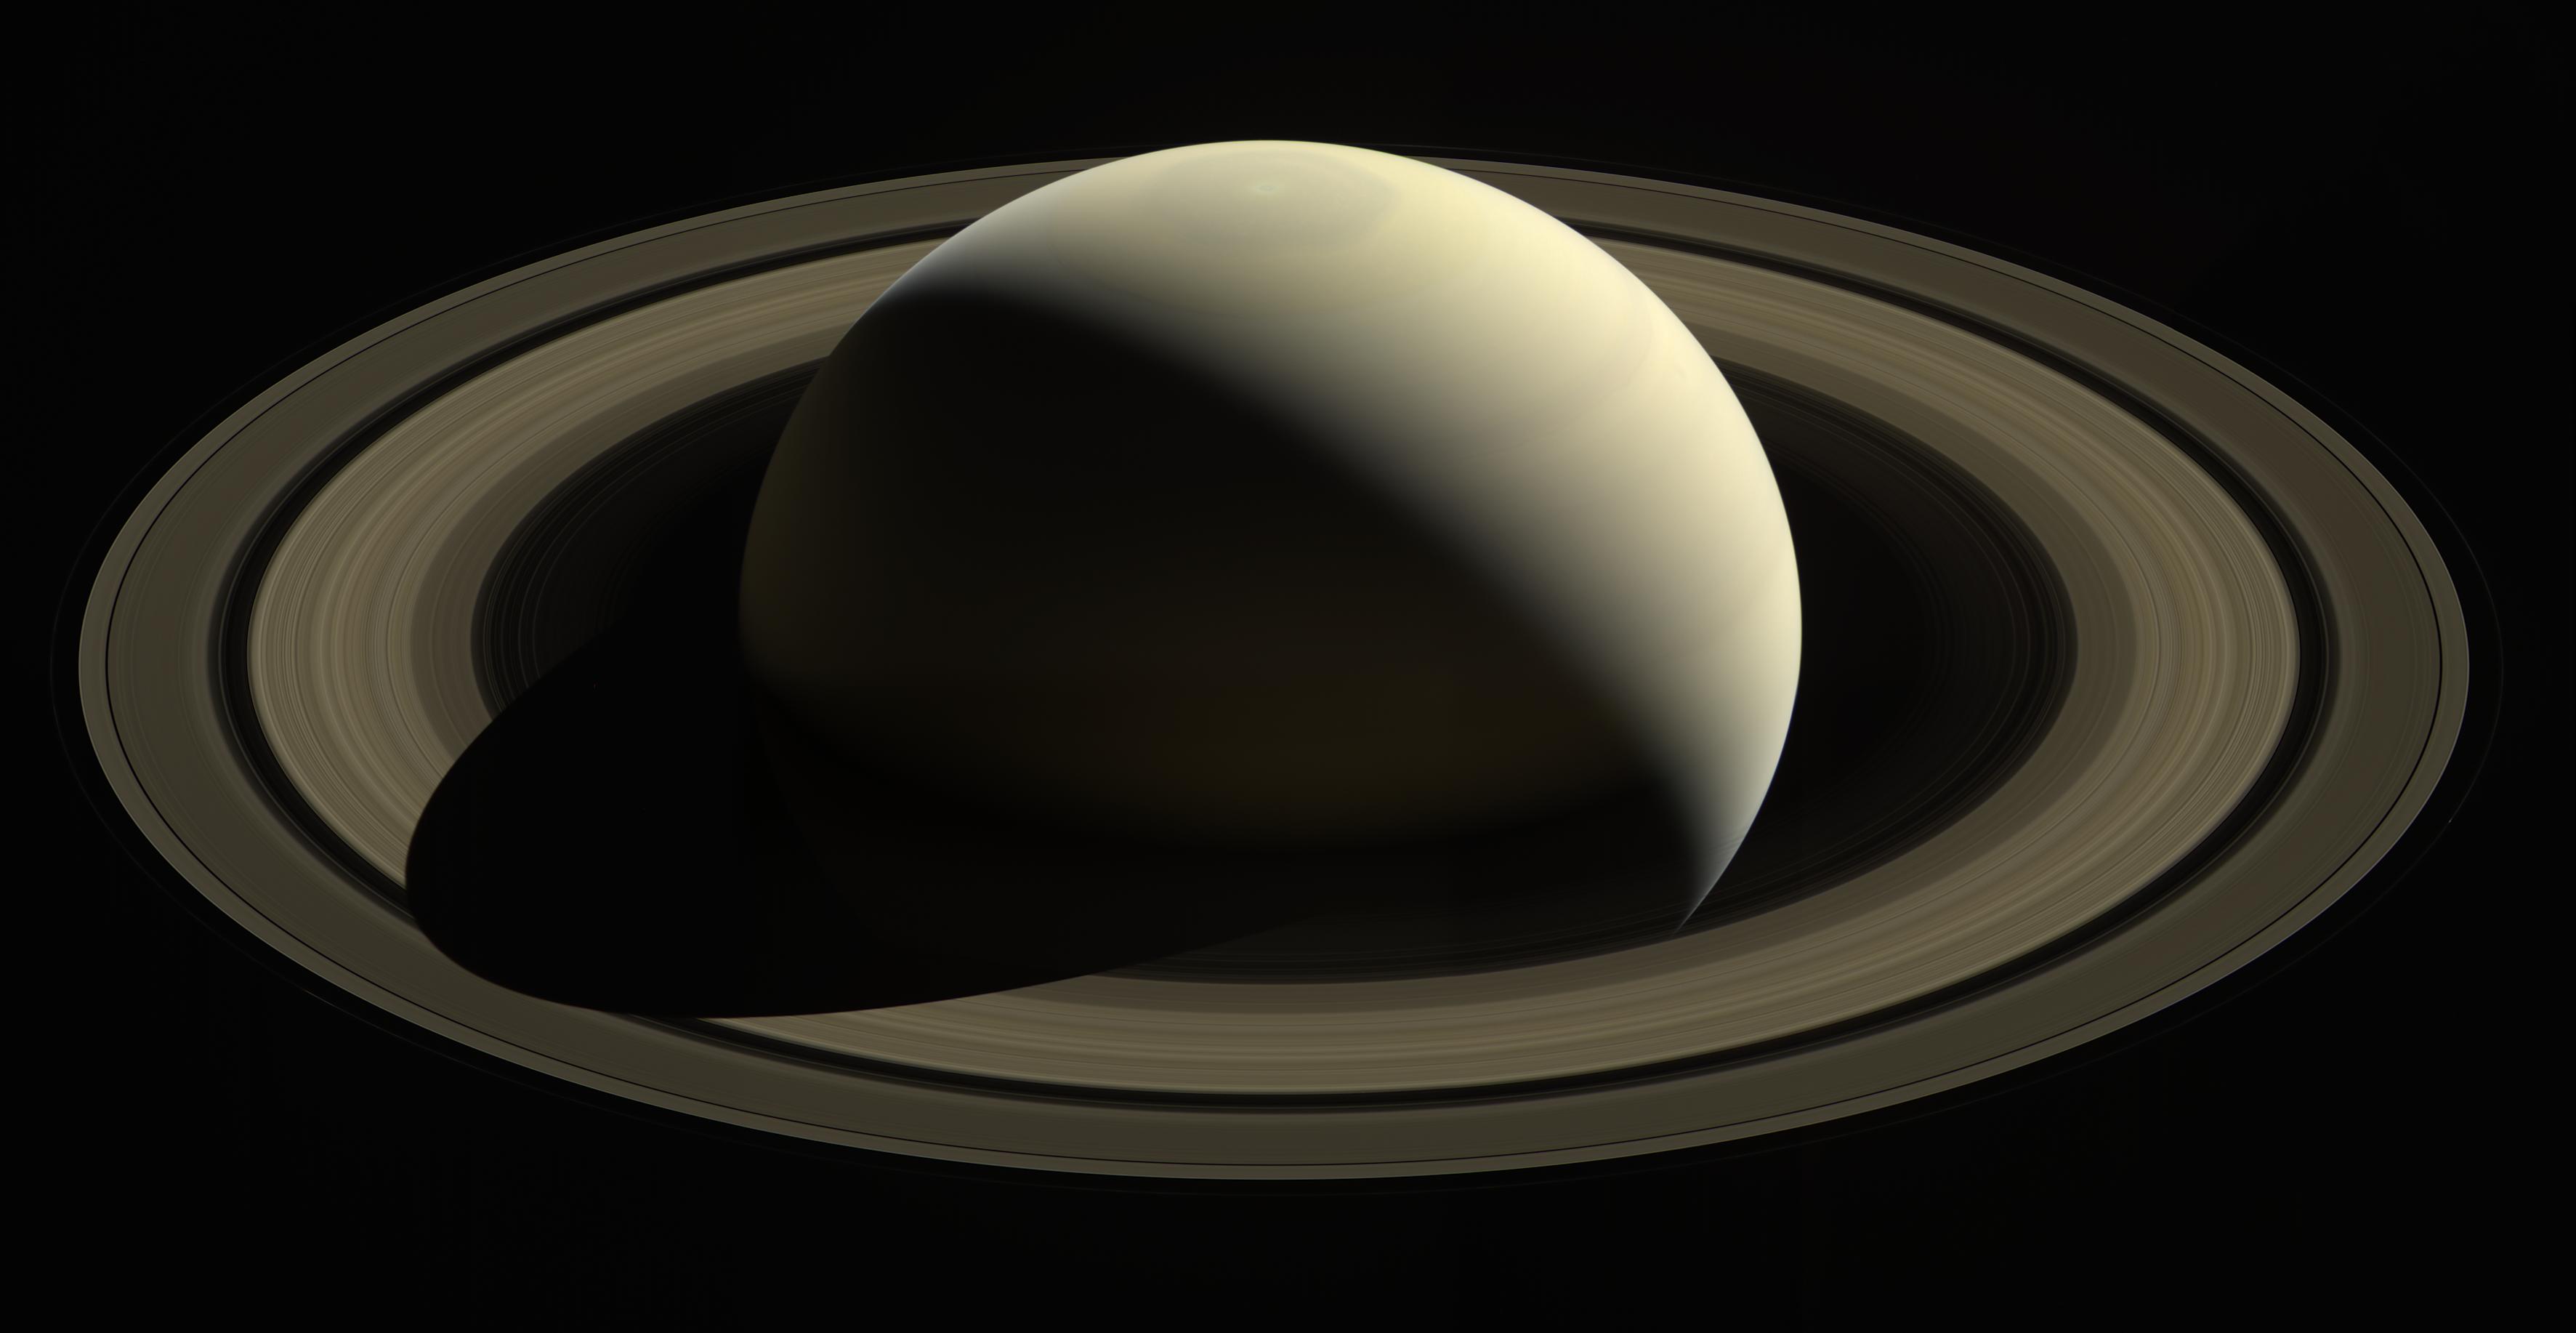 A spacecraft looks down on a soft gold-colored Saturn surrounded by its rings.